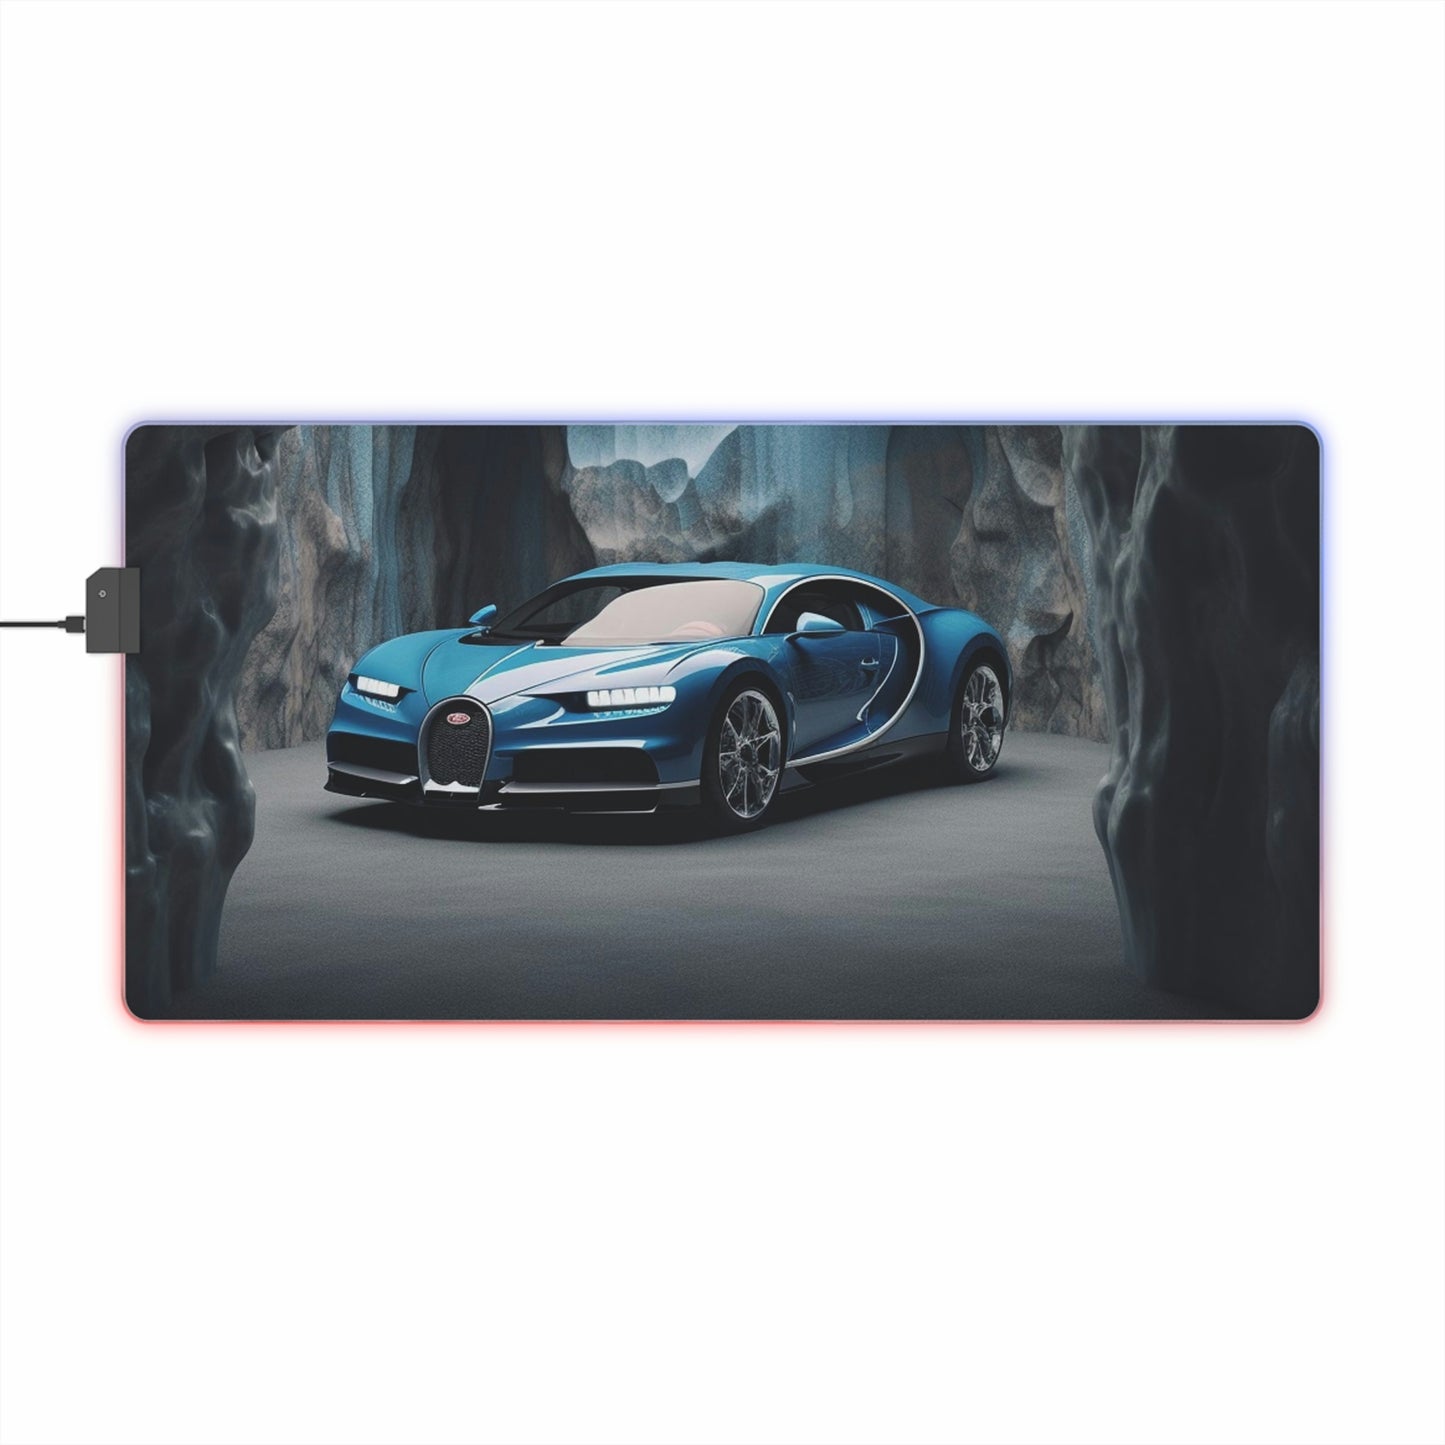 LED Gaming Mouse Pad Bugatti Real Look 2